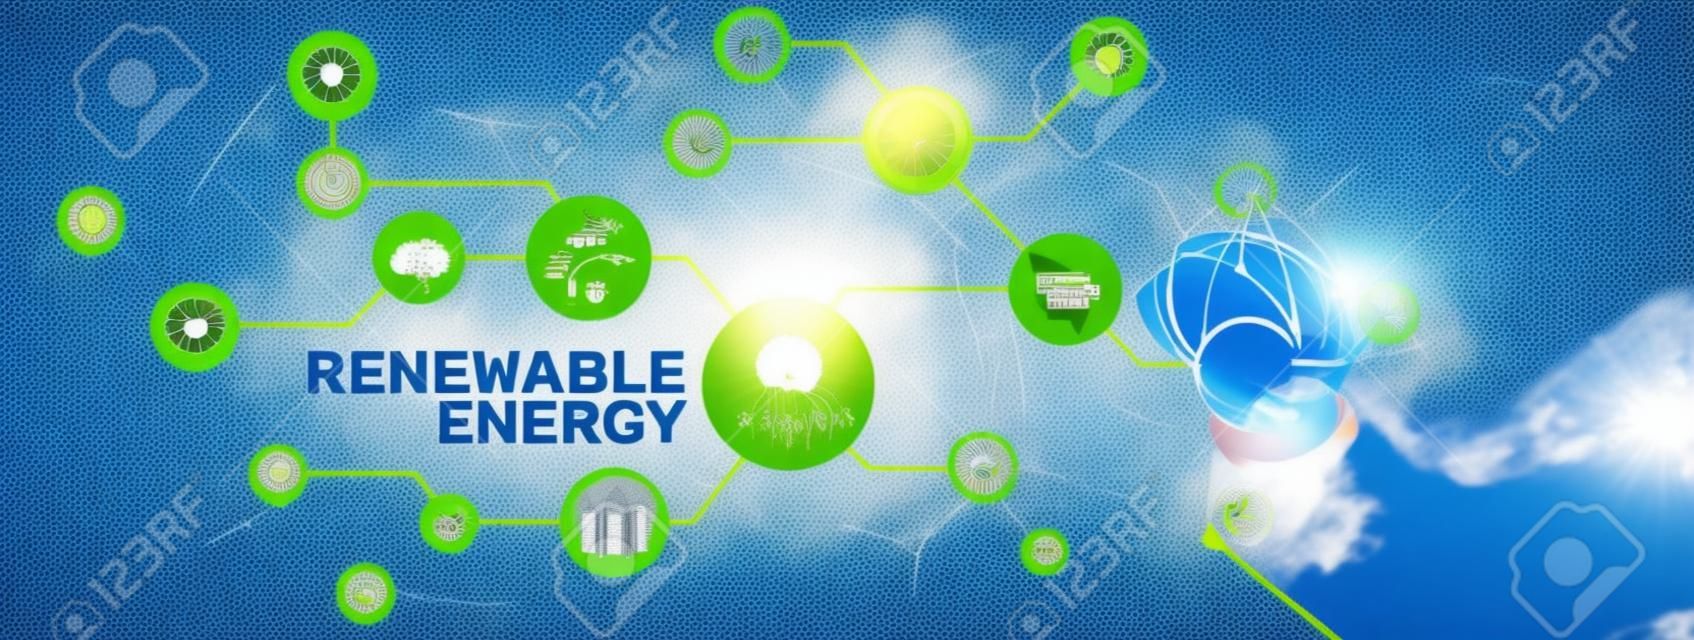 Renewable Energy Resources. The latest modern technological solutions